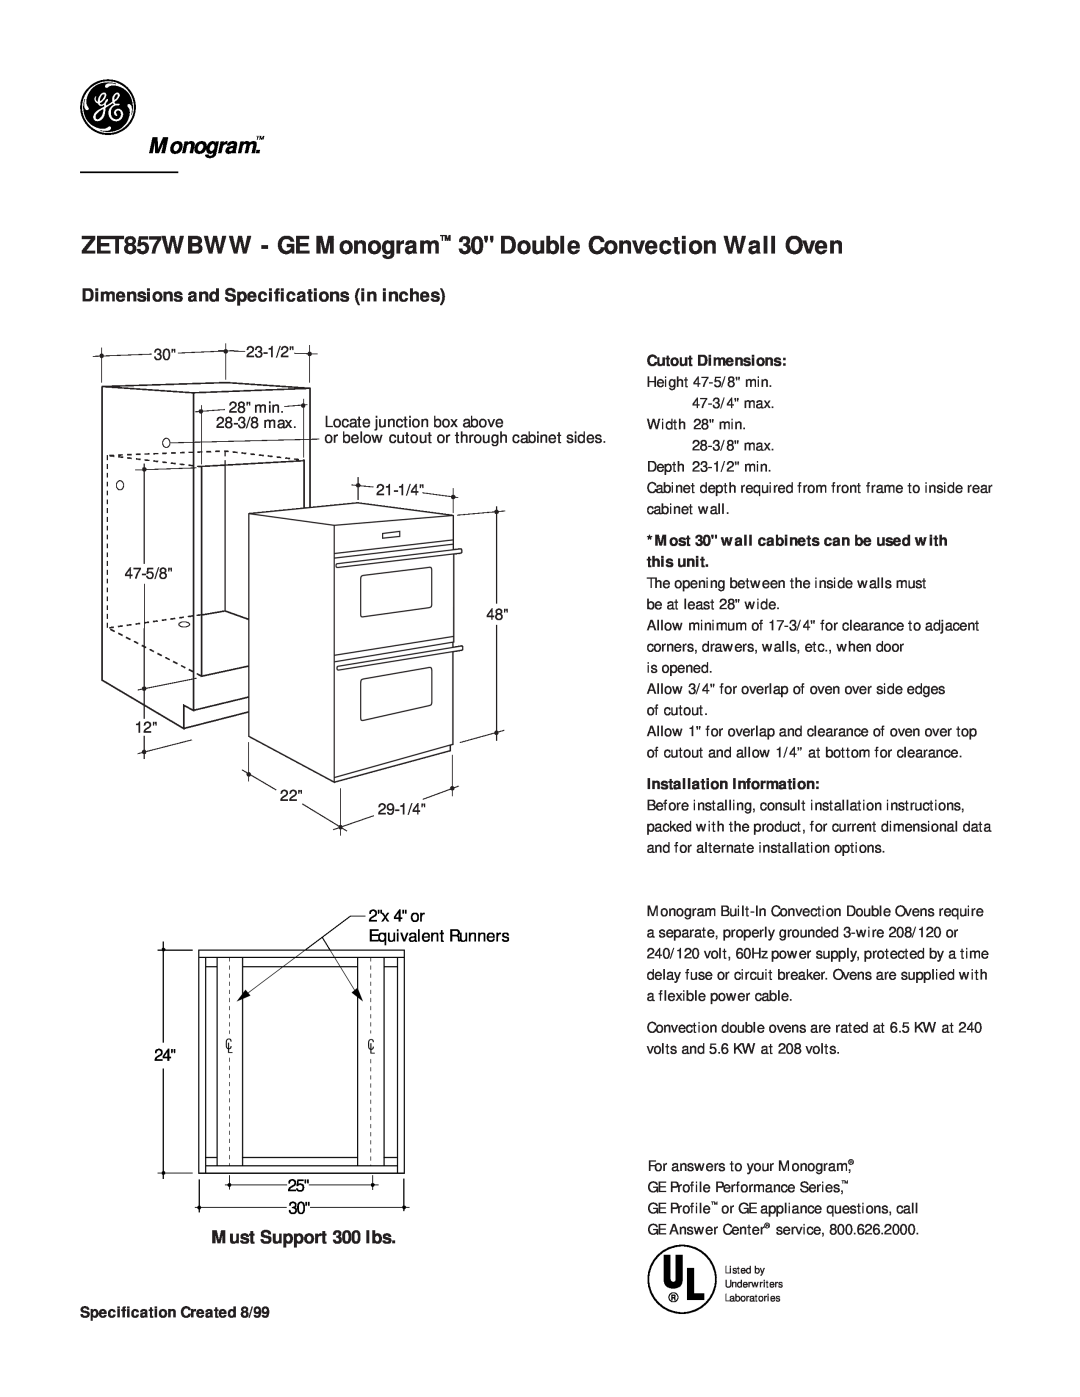 GE Monogram dimensions ZET857WBWW - GE Monogram 30 Double Convection Wall Oven, Dimensions and Specifications in inches 